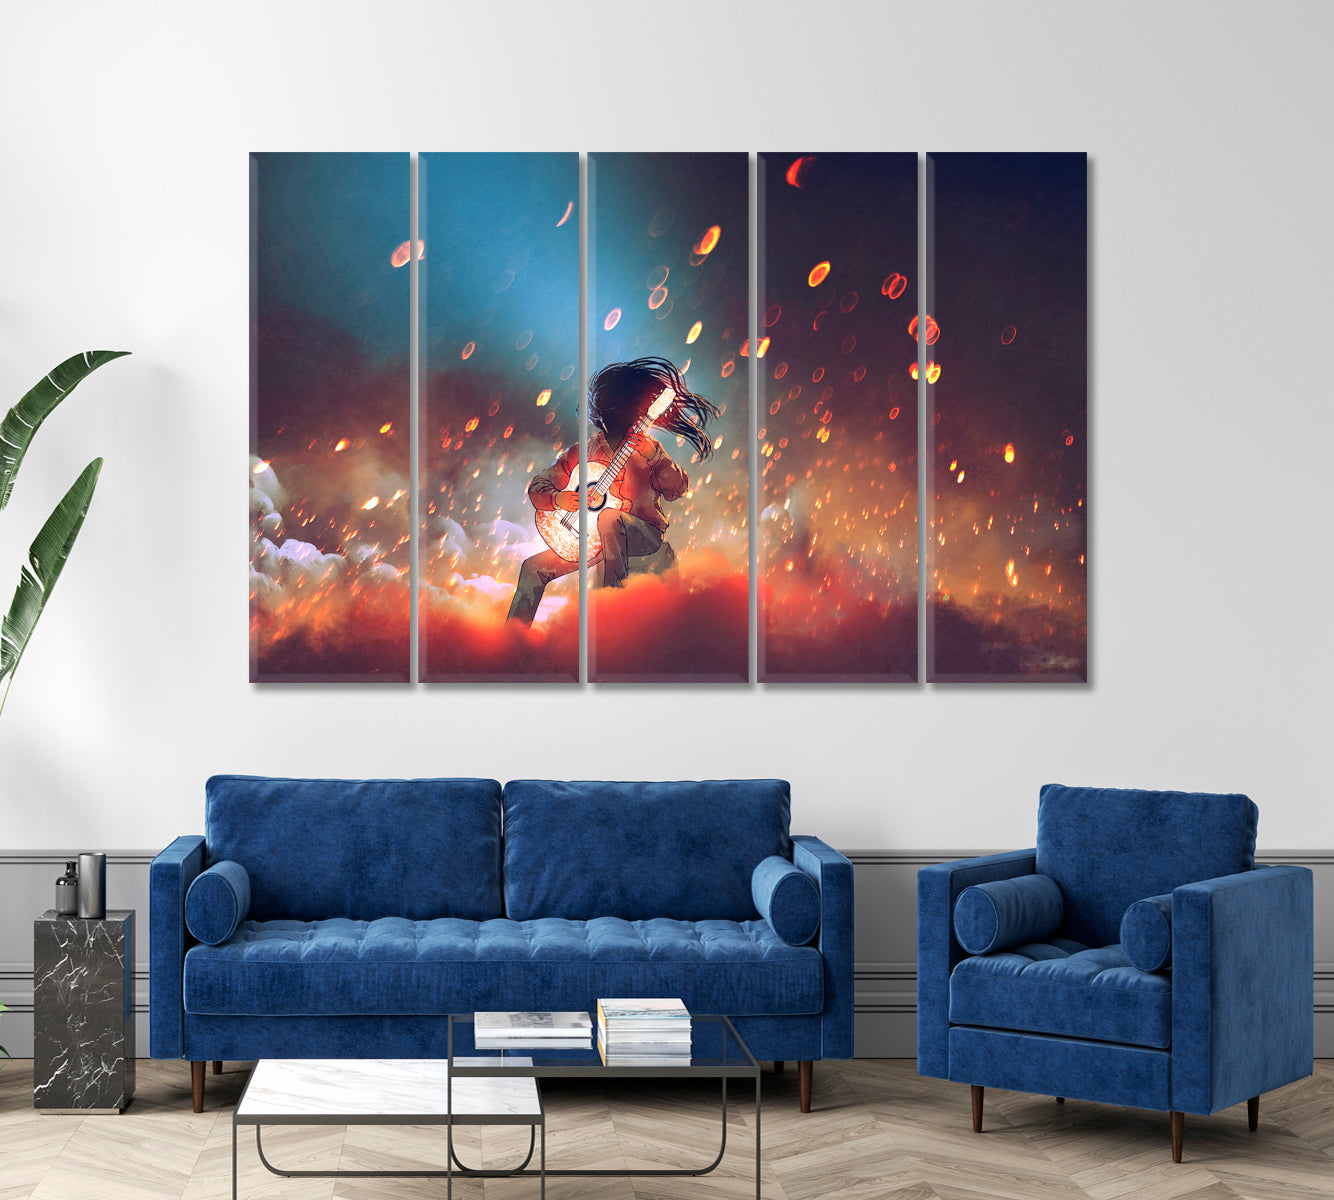 SURREAL Mysterious Man Playing the Glowing Guitar in the Smoke Surreal Fantasy Large Art Print Décor Artesty   